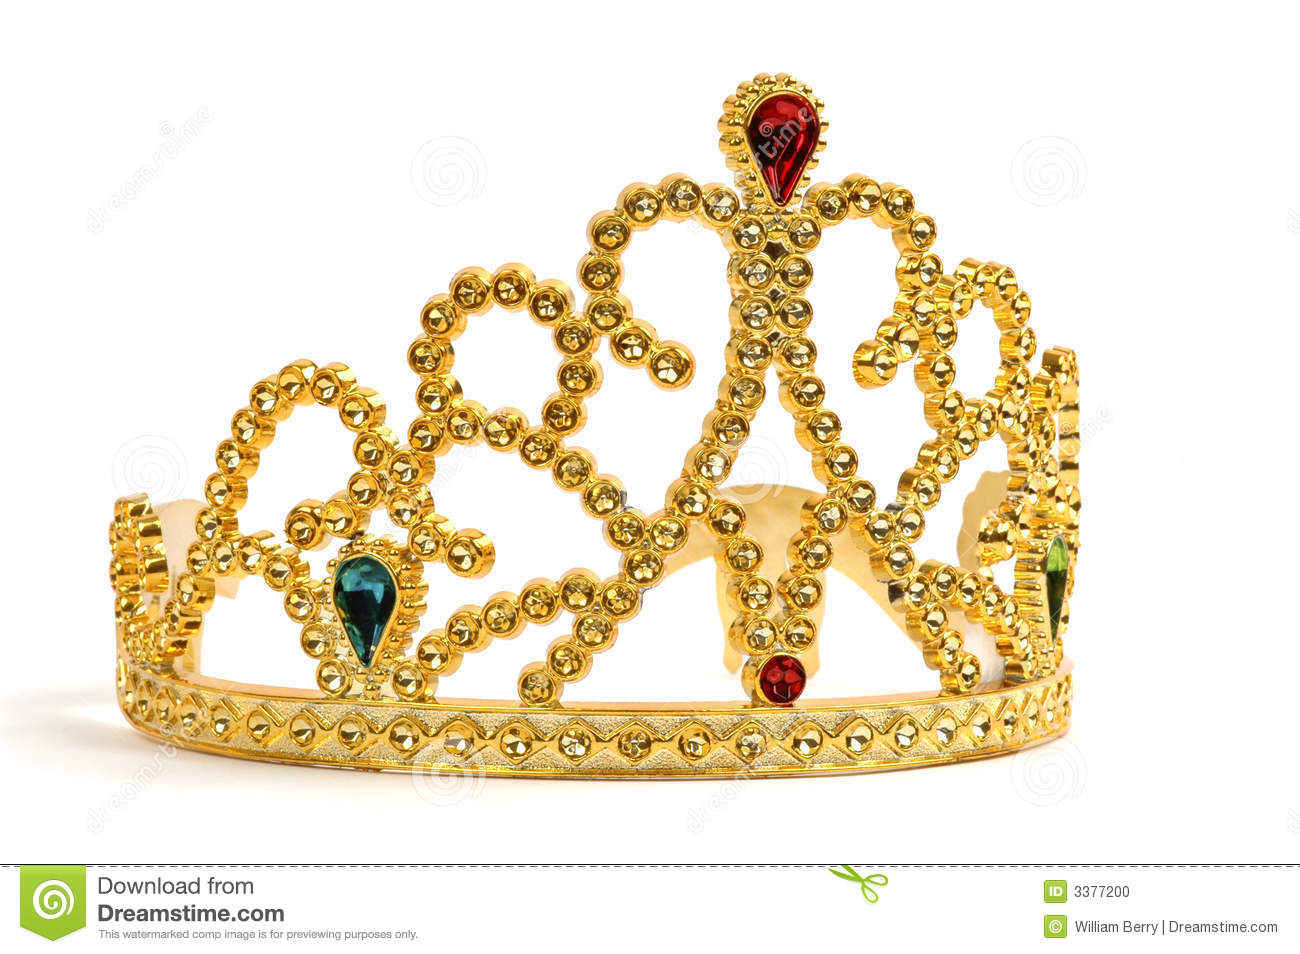 Gold Tiara Studded With Jewels And Diamonds 